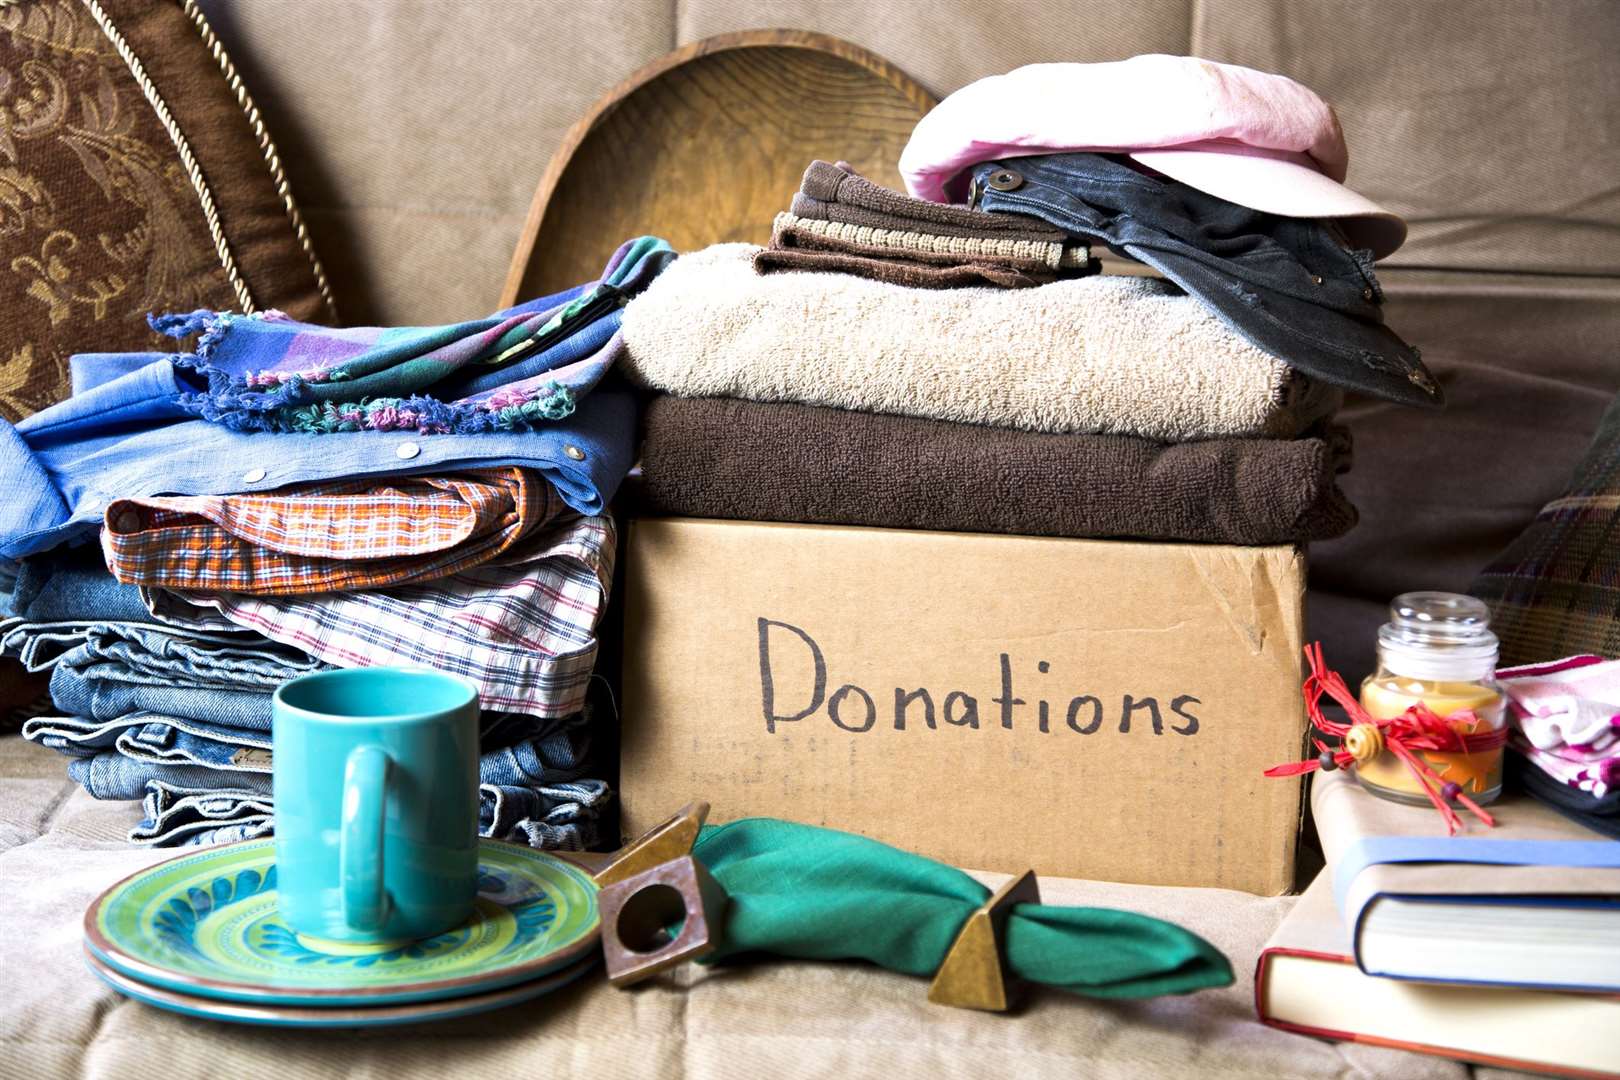 There are tips and hacks for getting the most from a charity shop say those in the know. Photo: iStock.